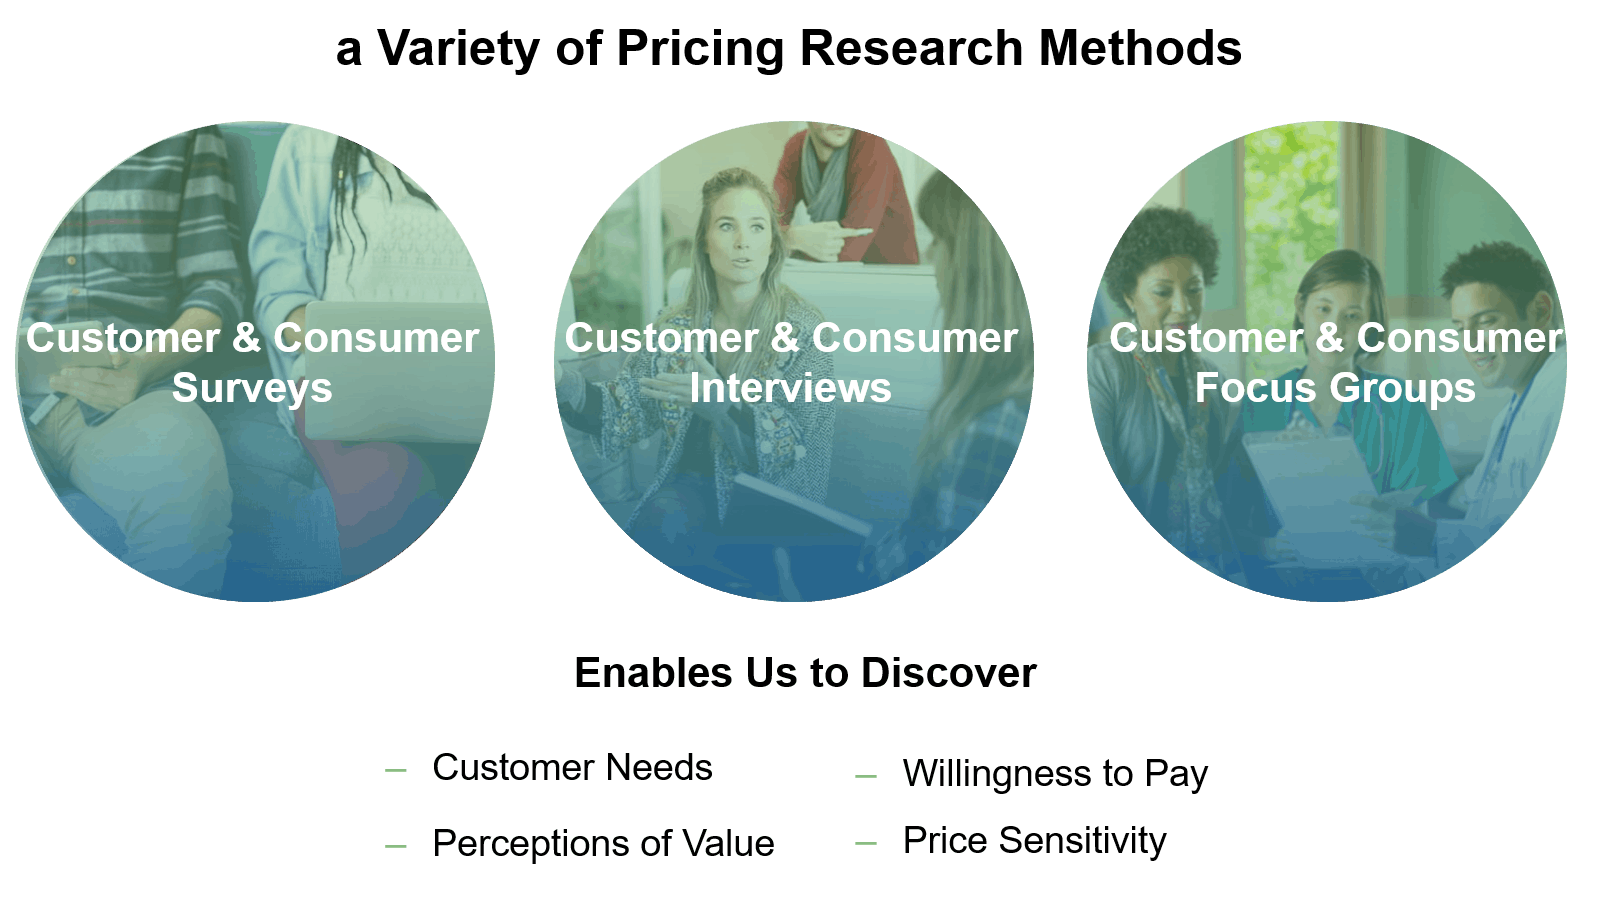 Pricing New Digital Products Amidst Uncertainty